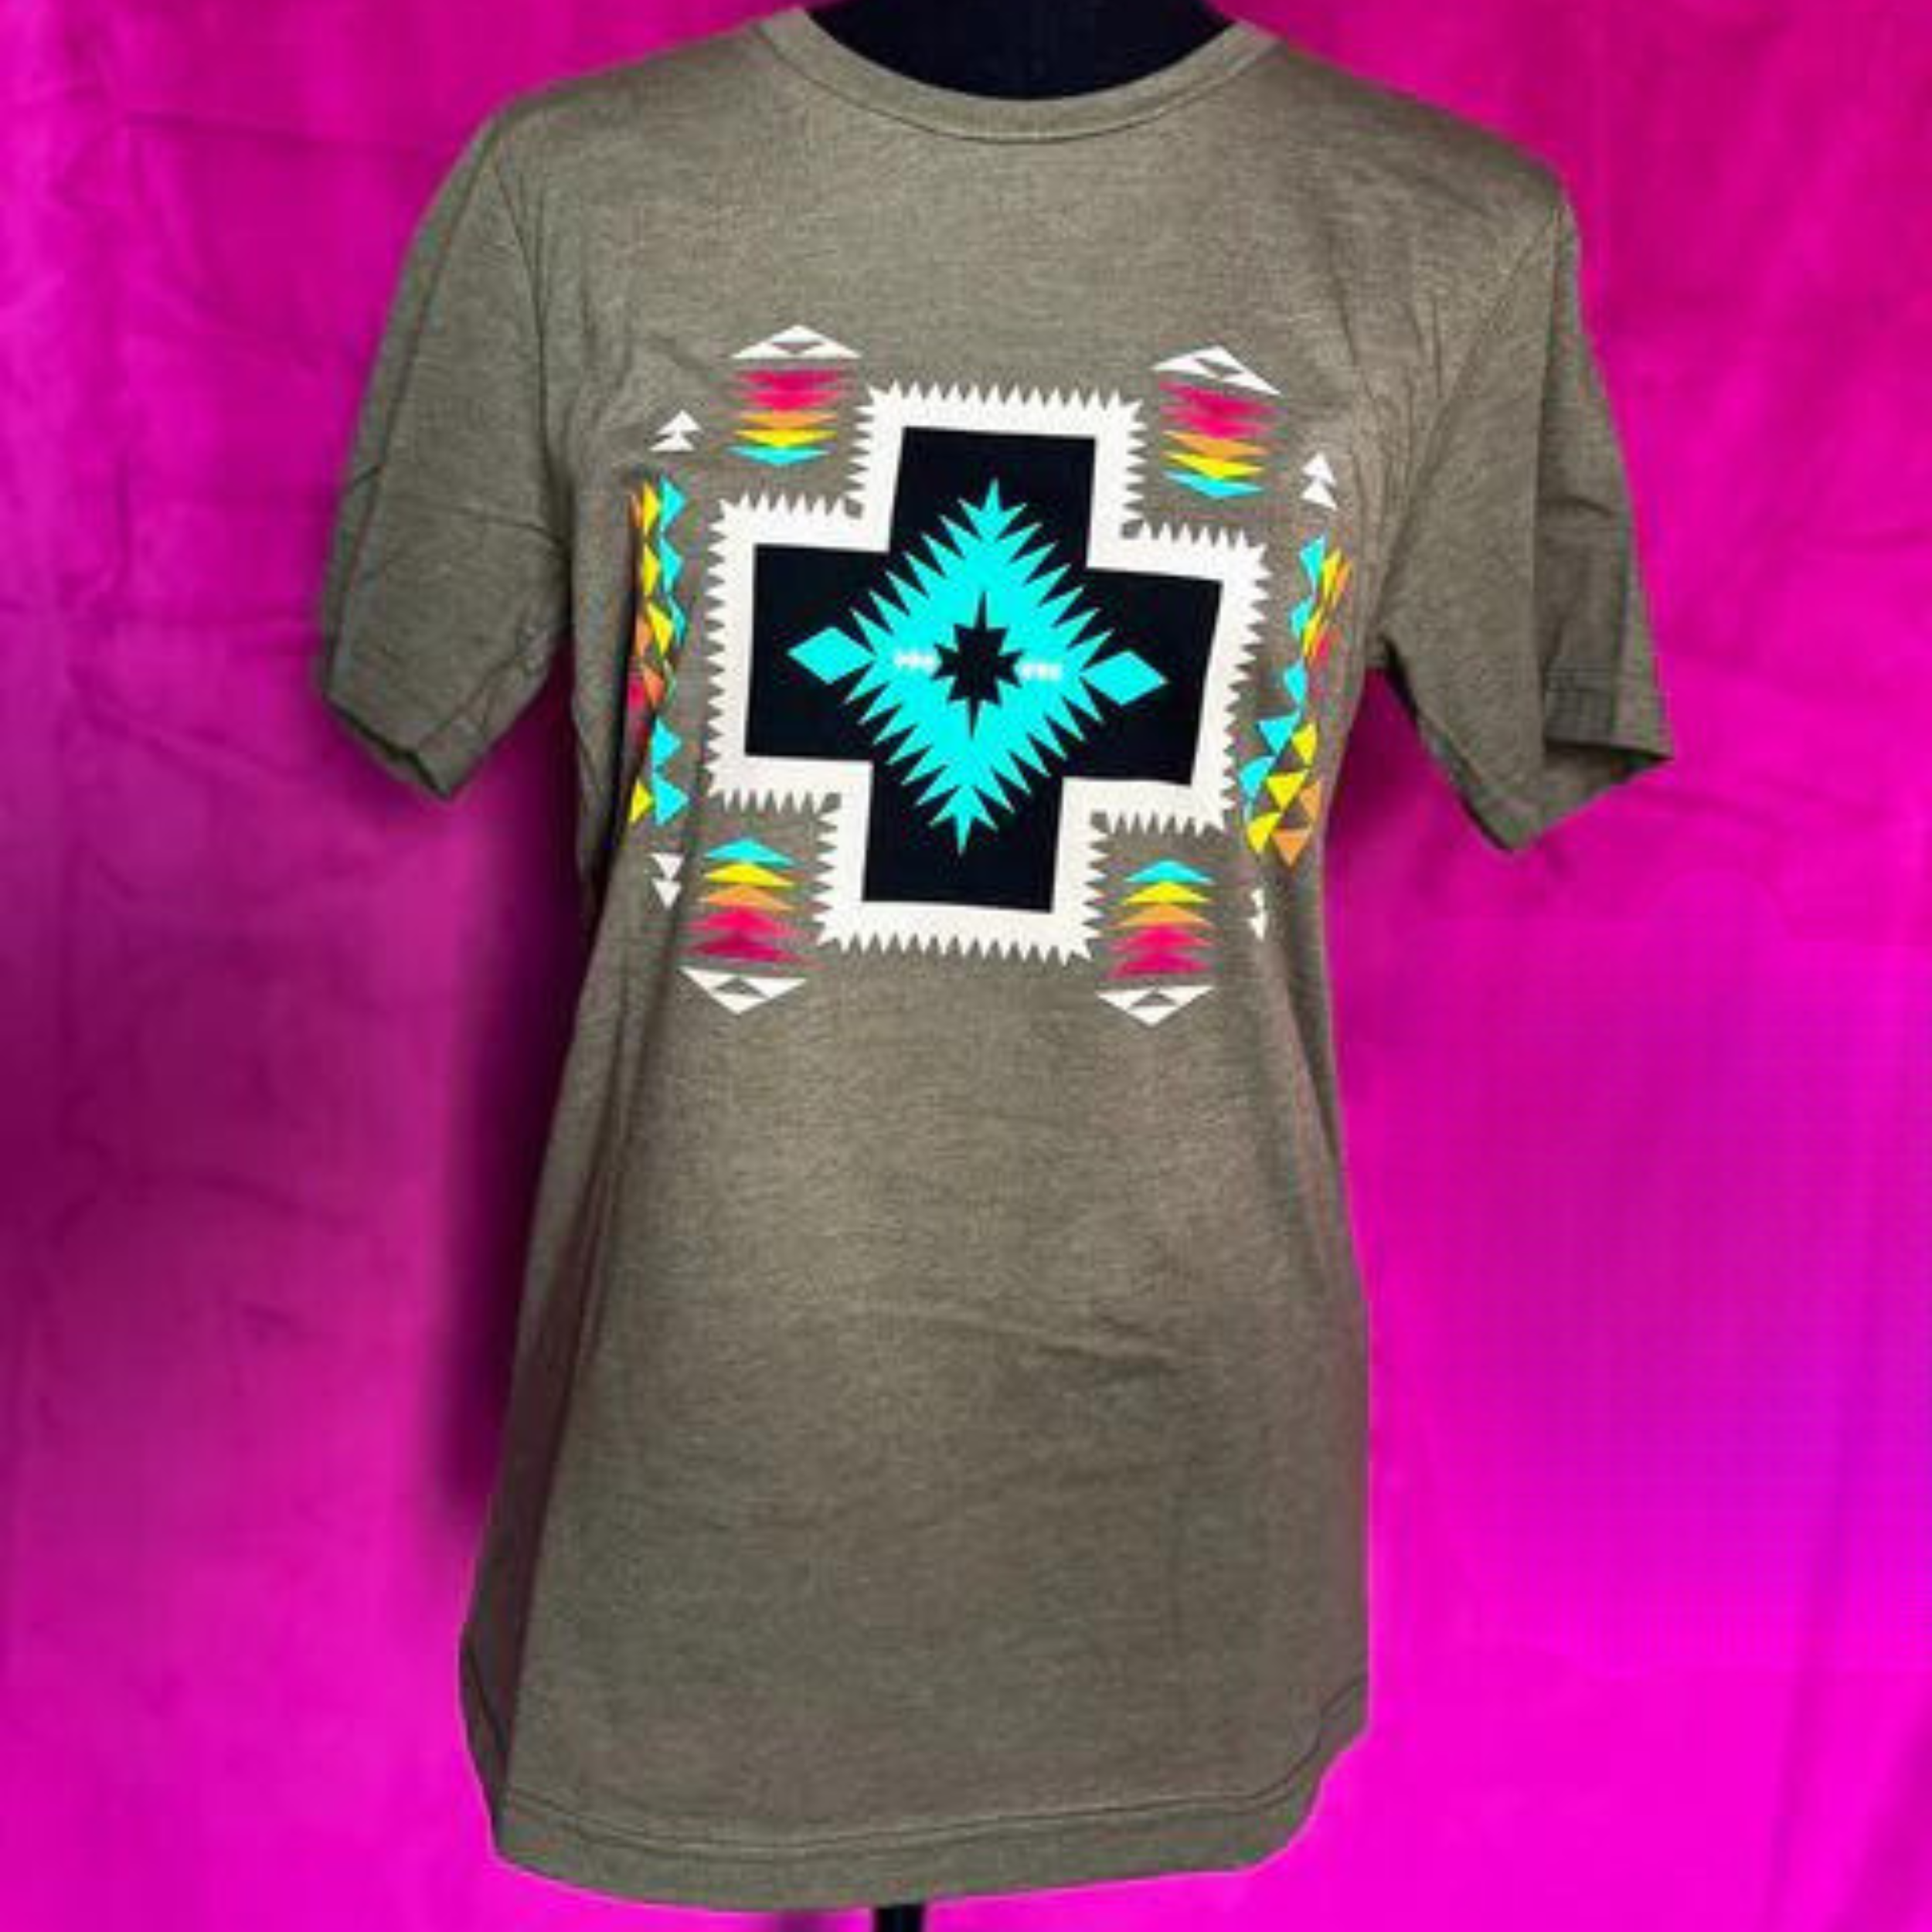 A dark heather grey tee with a tribal inspired graphic featuring a black cross with a blue angled center and angled white border. Outside of the cross is a series of rainbow arrowheads going in every direction. Item is pictured on a pink background.